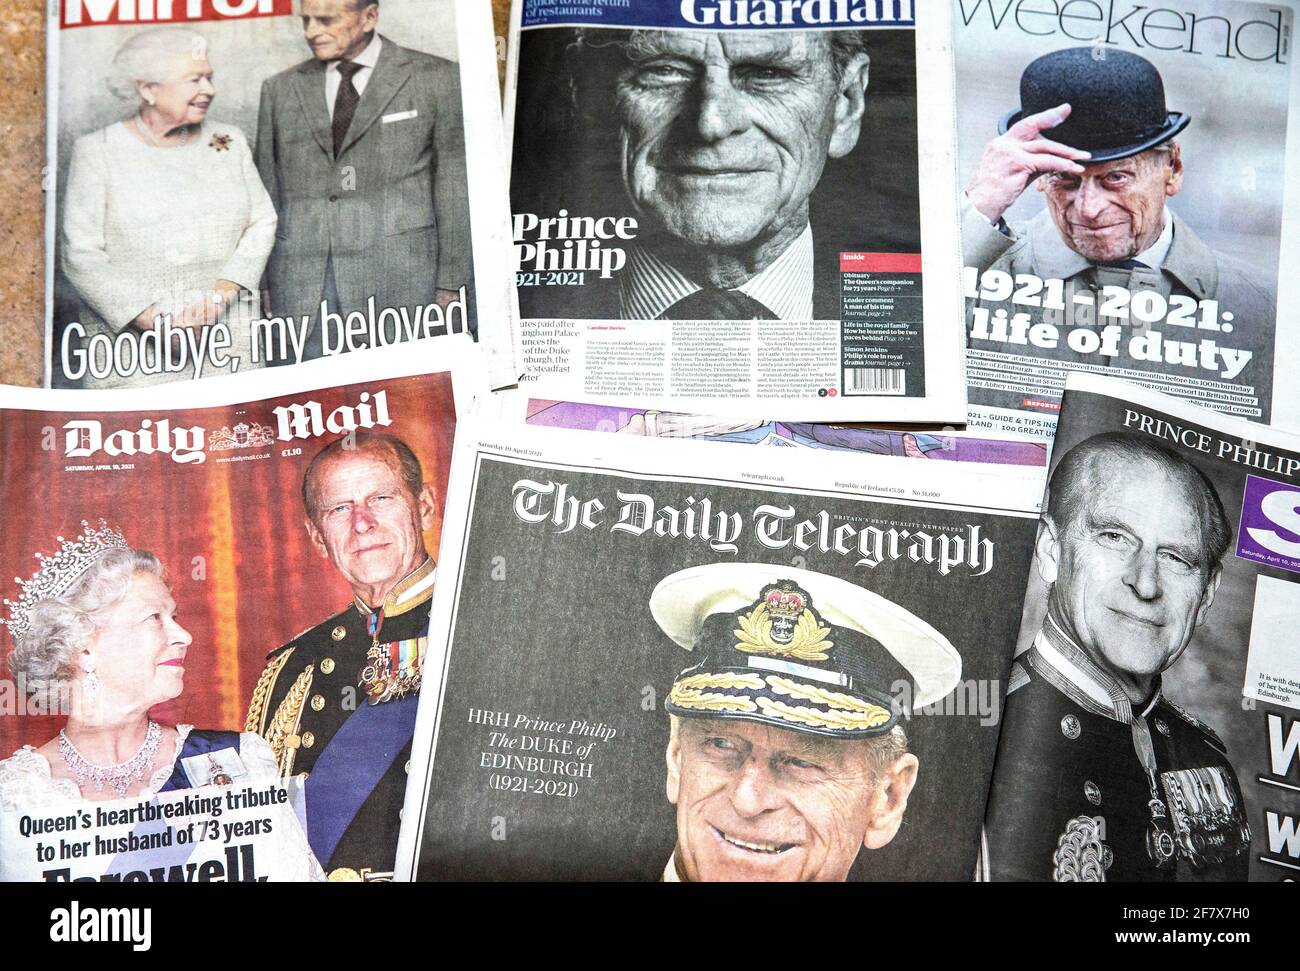 London, UK. 10th Apr, 2021. British Newspapers pay tribute to Prince Philip who died on April 9th aged 99. Credit: Mark Thomas/Alamy Live News Stock Photo